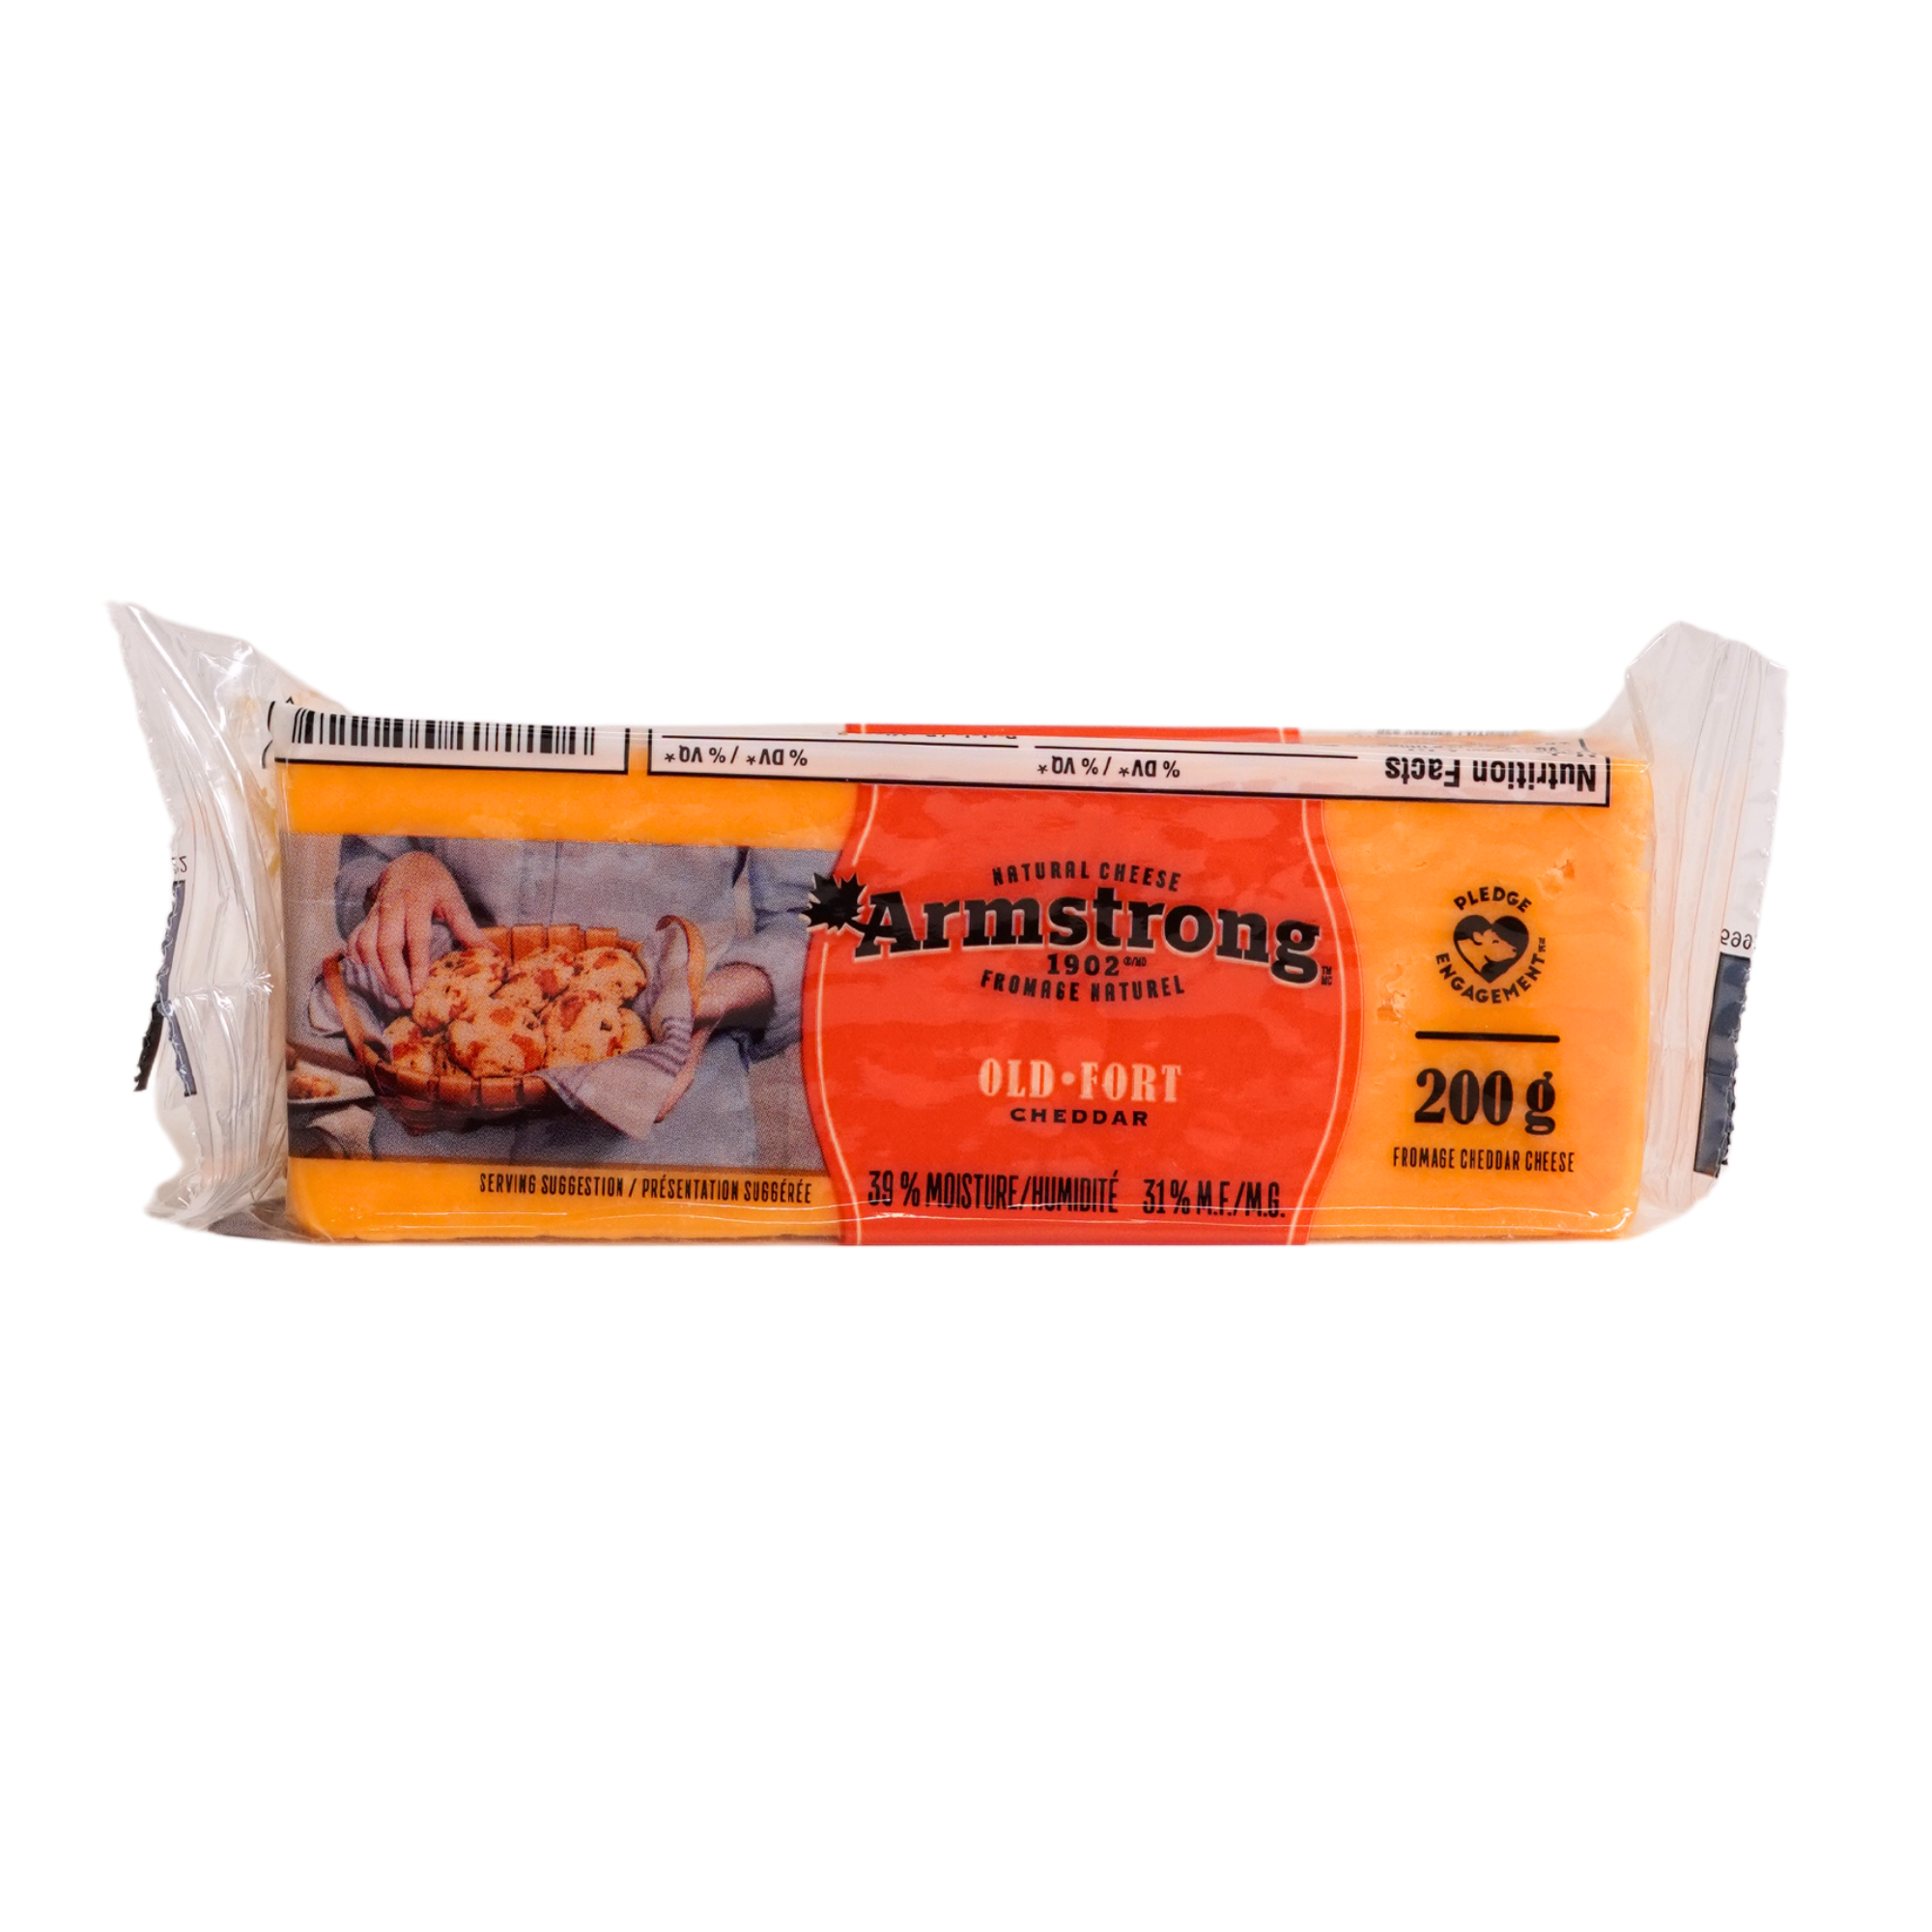 ARMSTRONG EXTRA OLD CHEDDAR CHEESE 200G